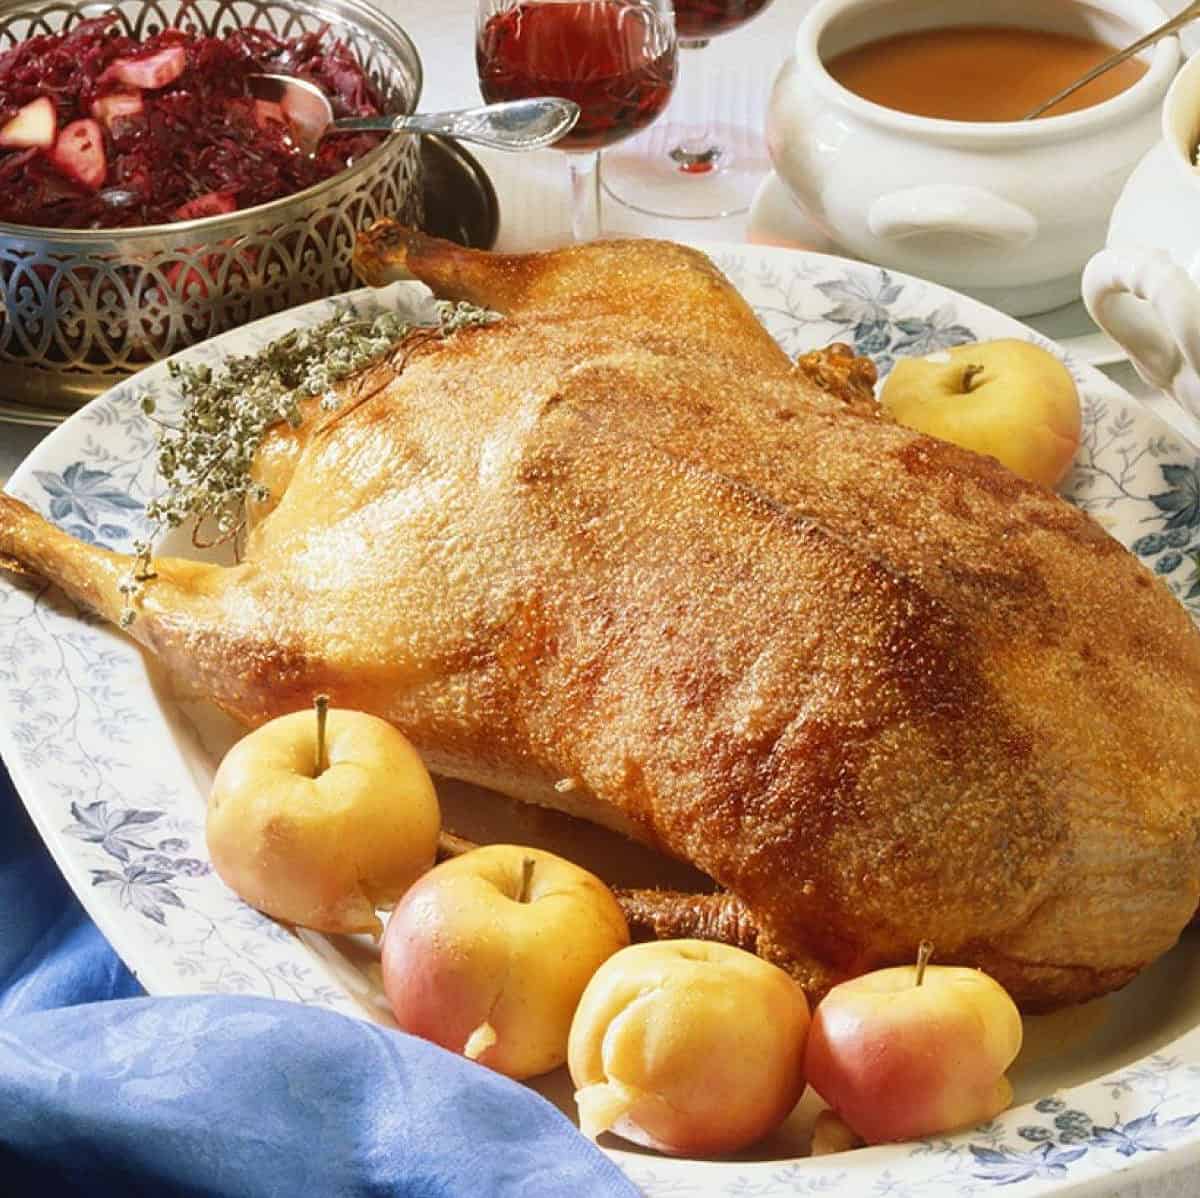  The aroma of roasted goose will fill your home and make everyone drool.